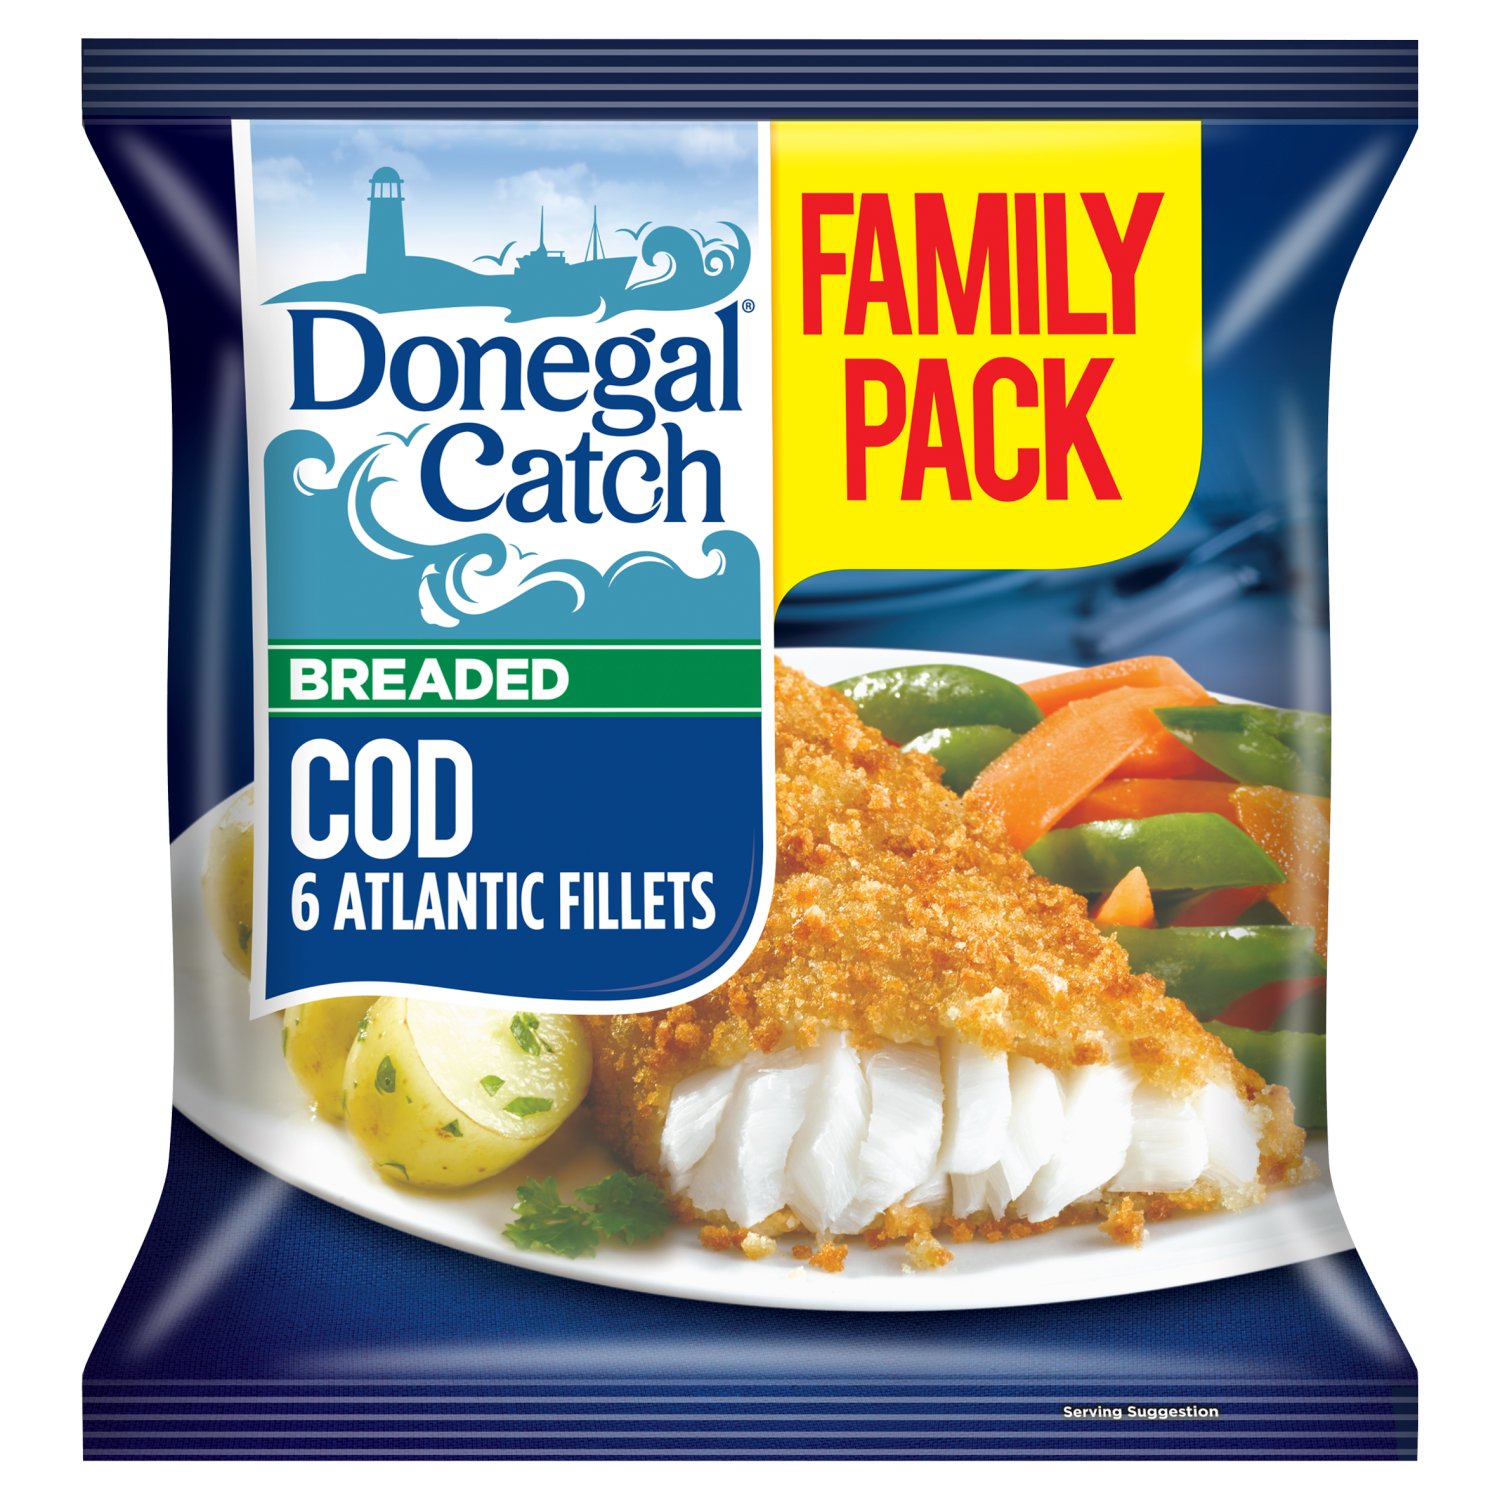 Cod is a mild flavoured fish with chunky flakes. Cod is high in protein.